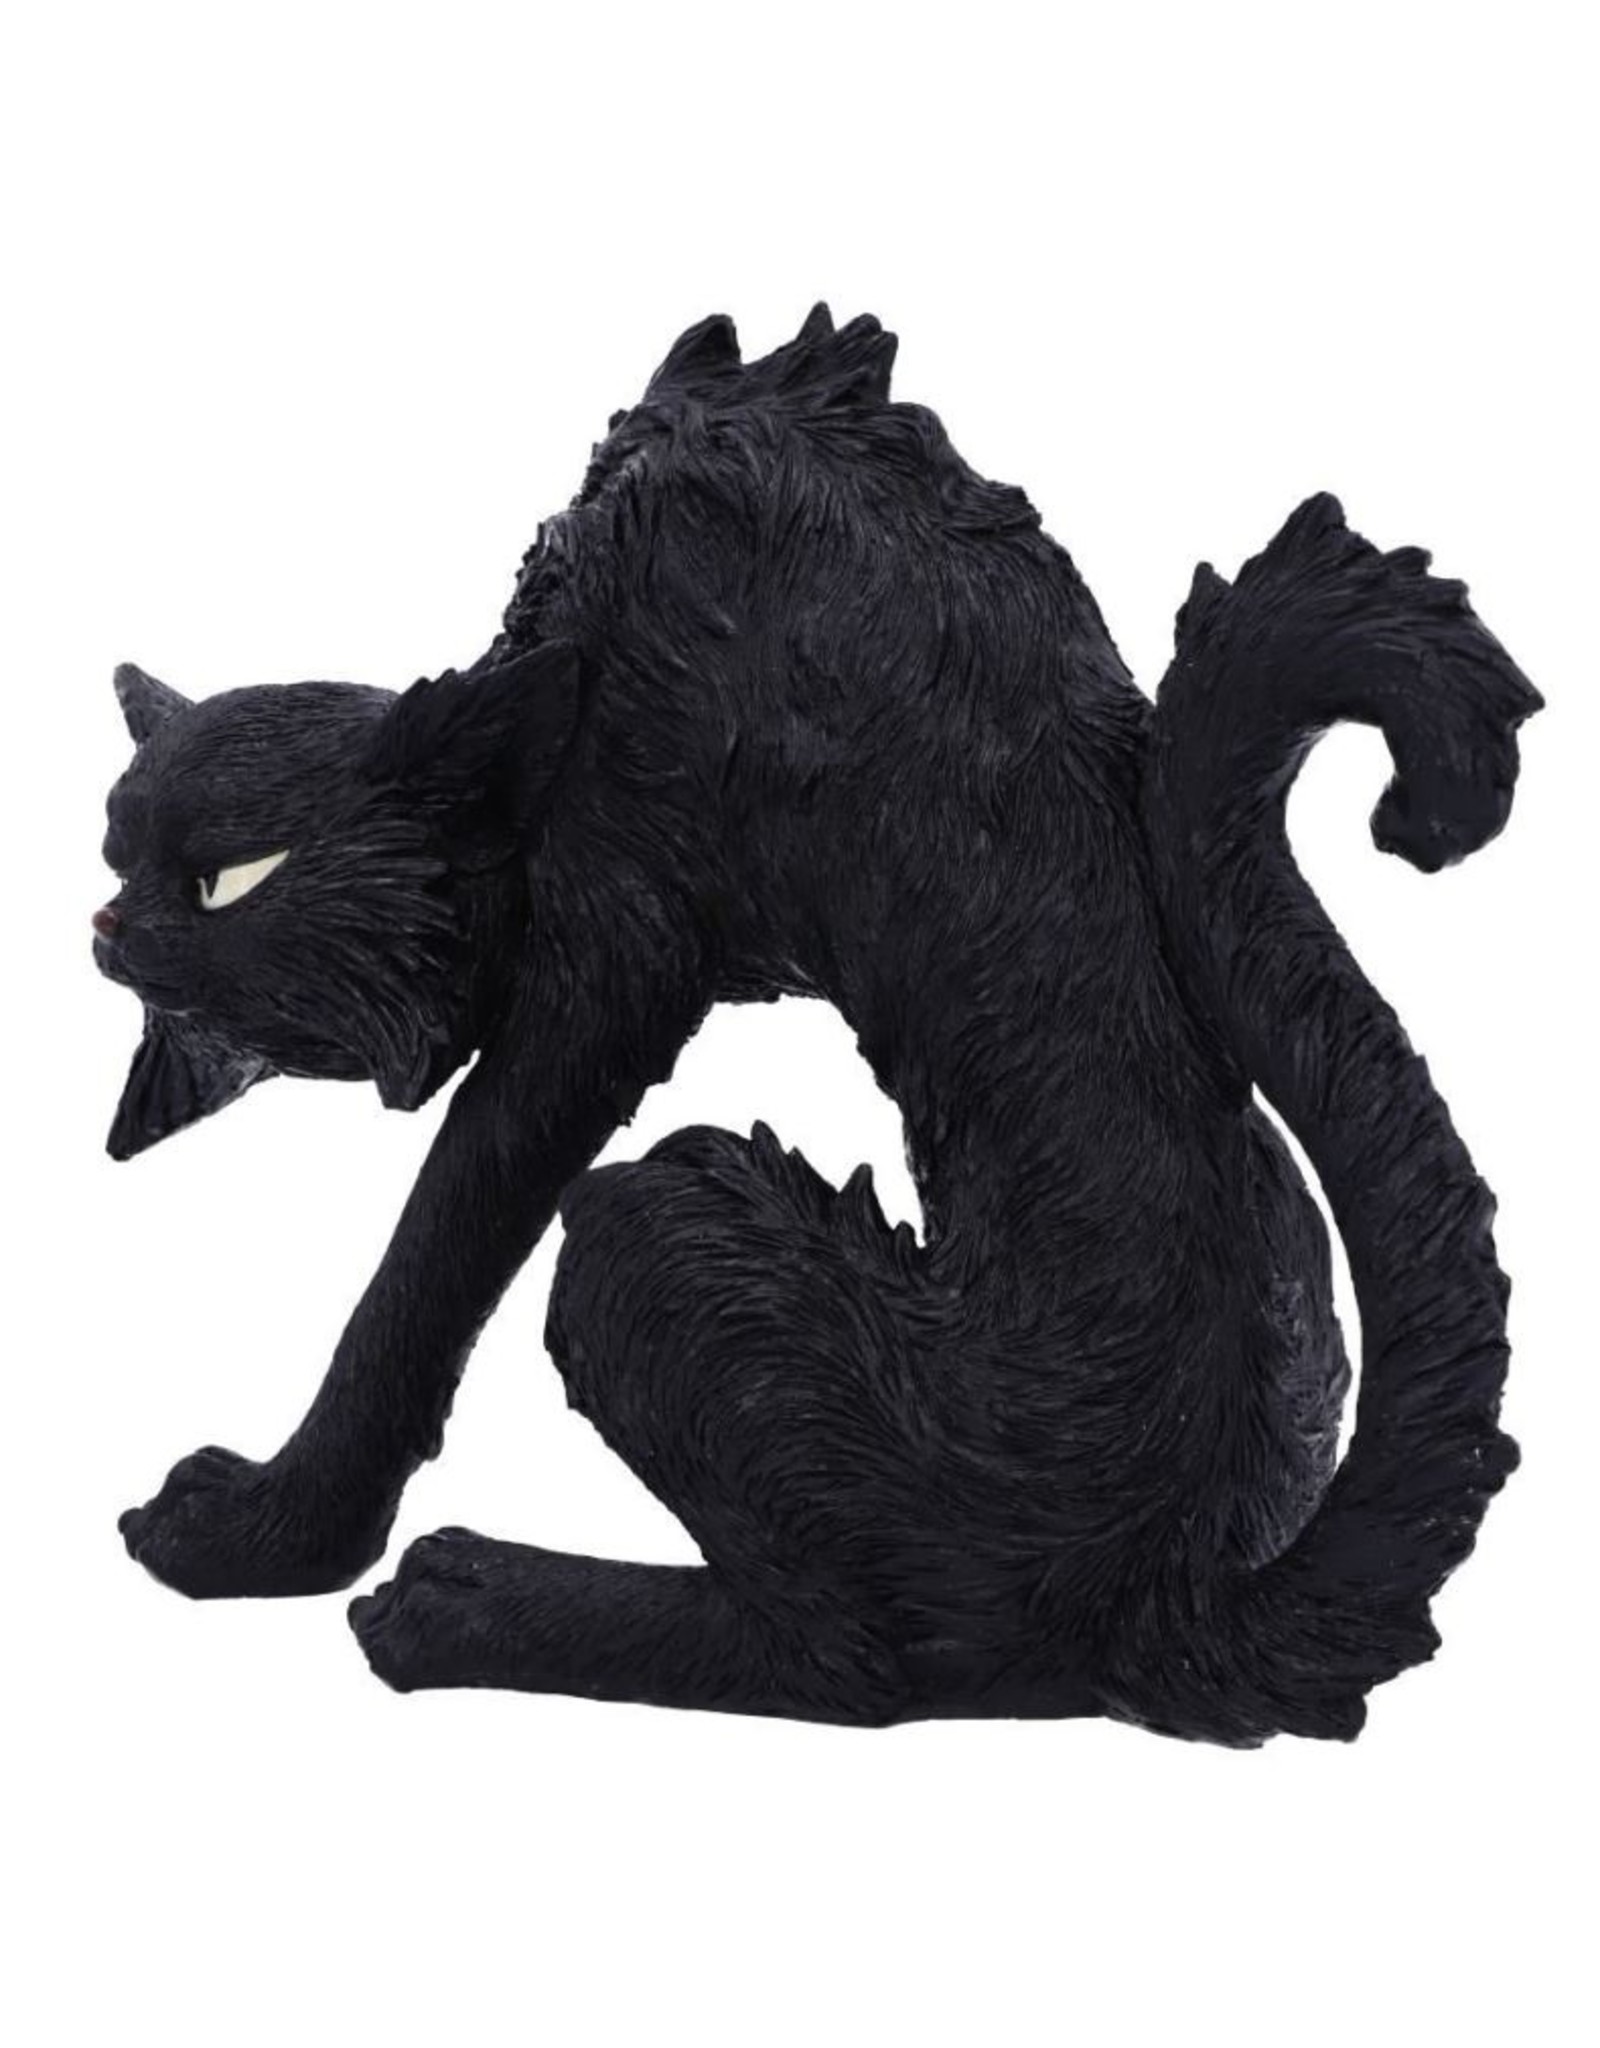 Alator Giftware & Lifestyle  - Black Cat Witches Familiar Figure Spite (Small )